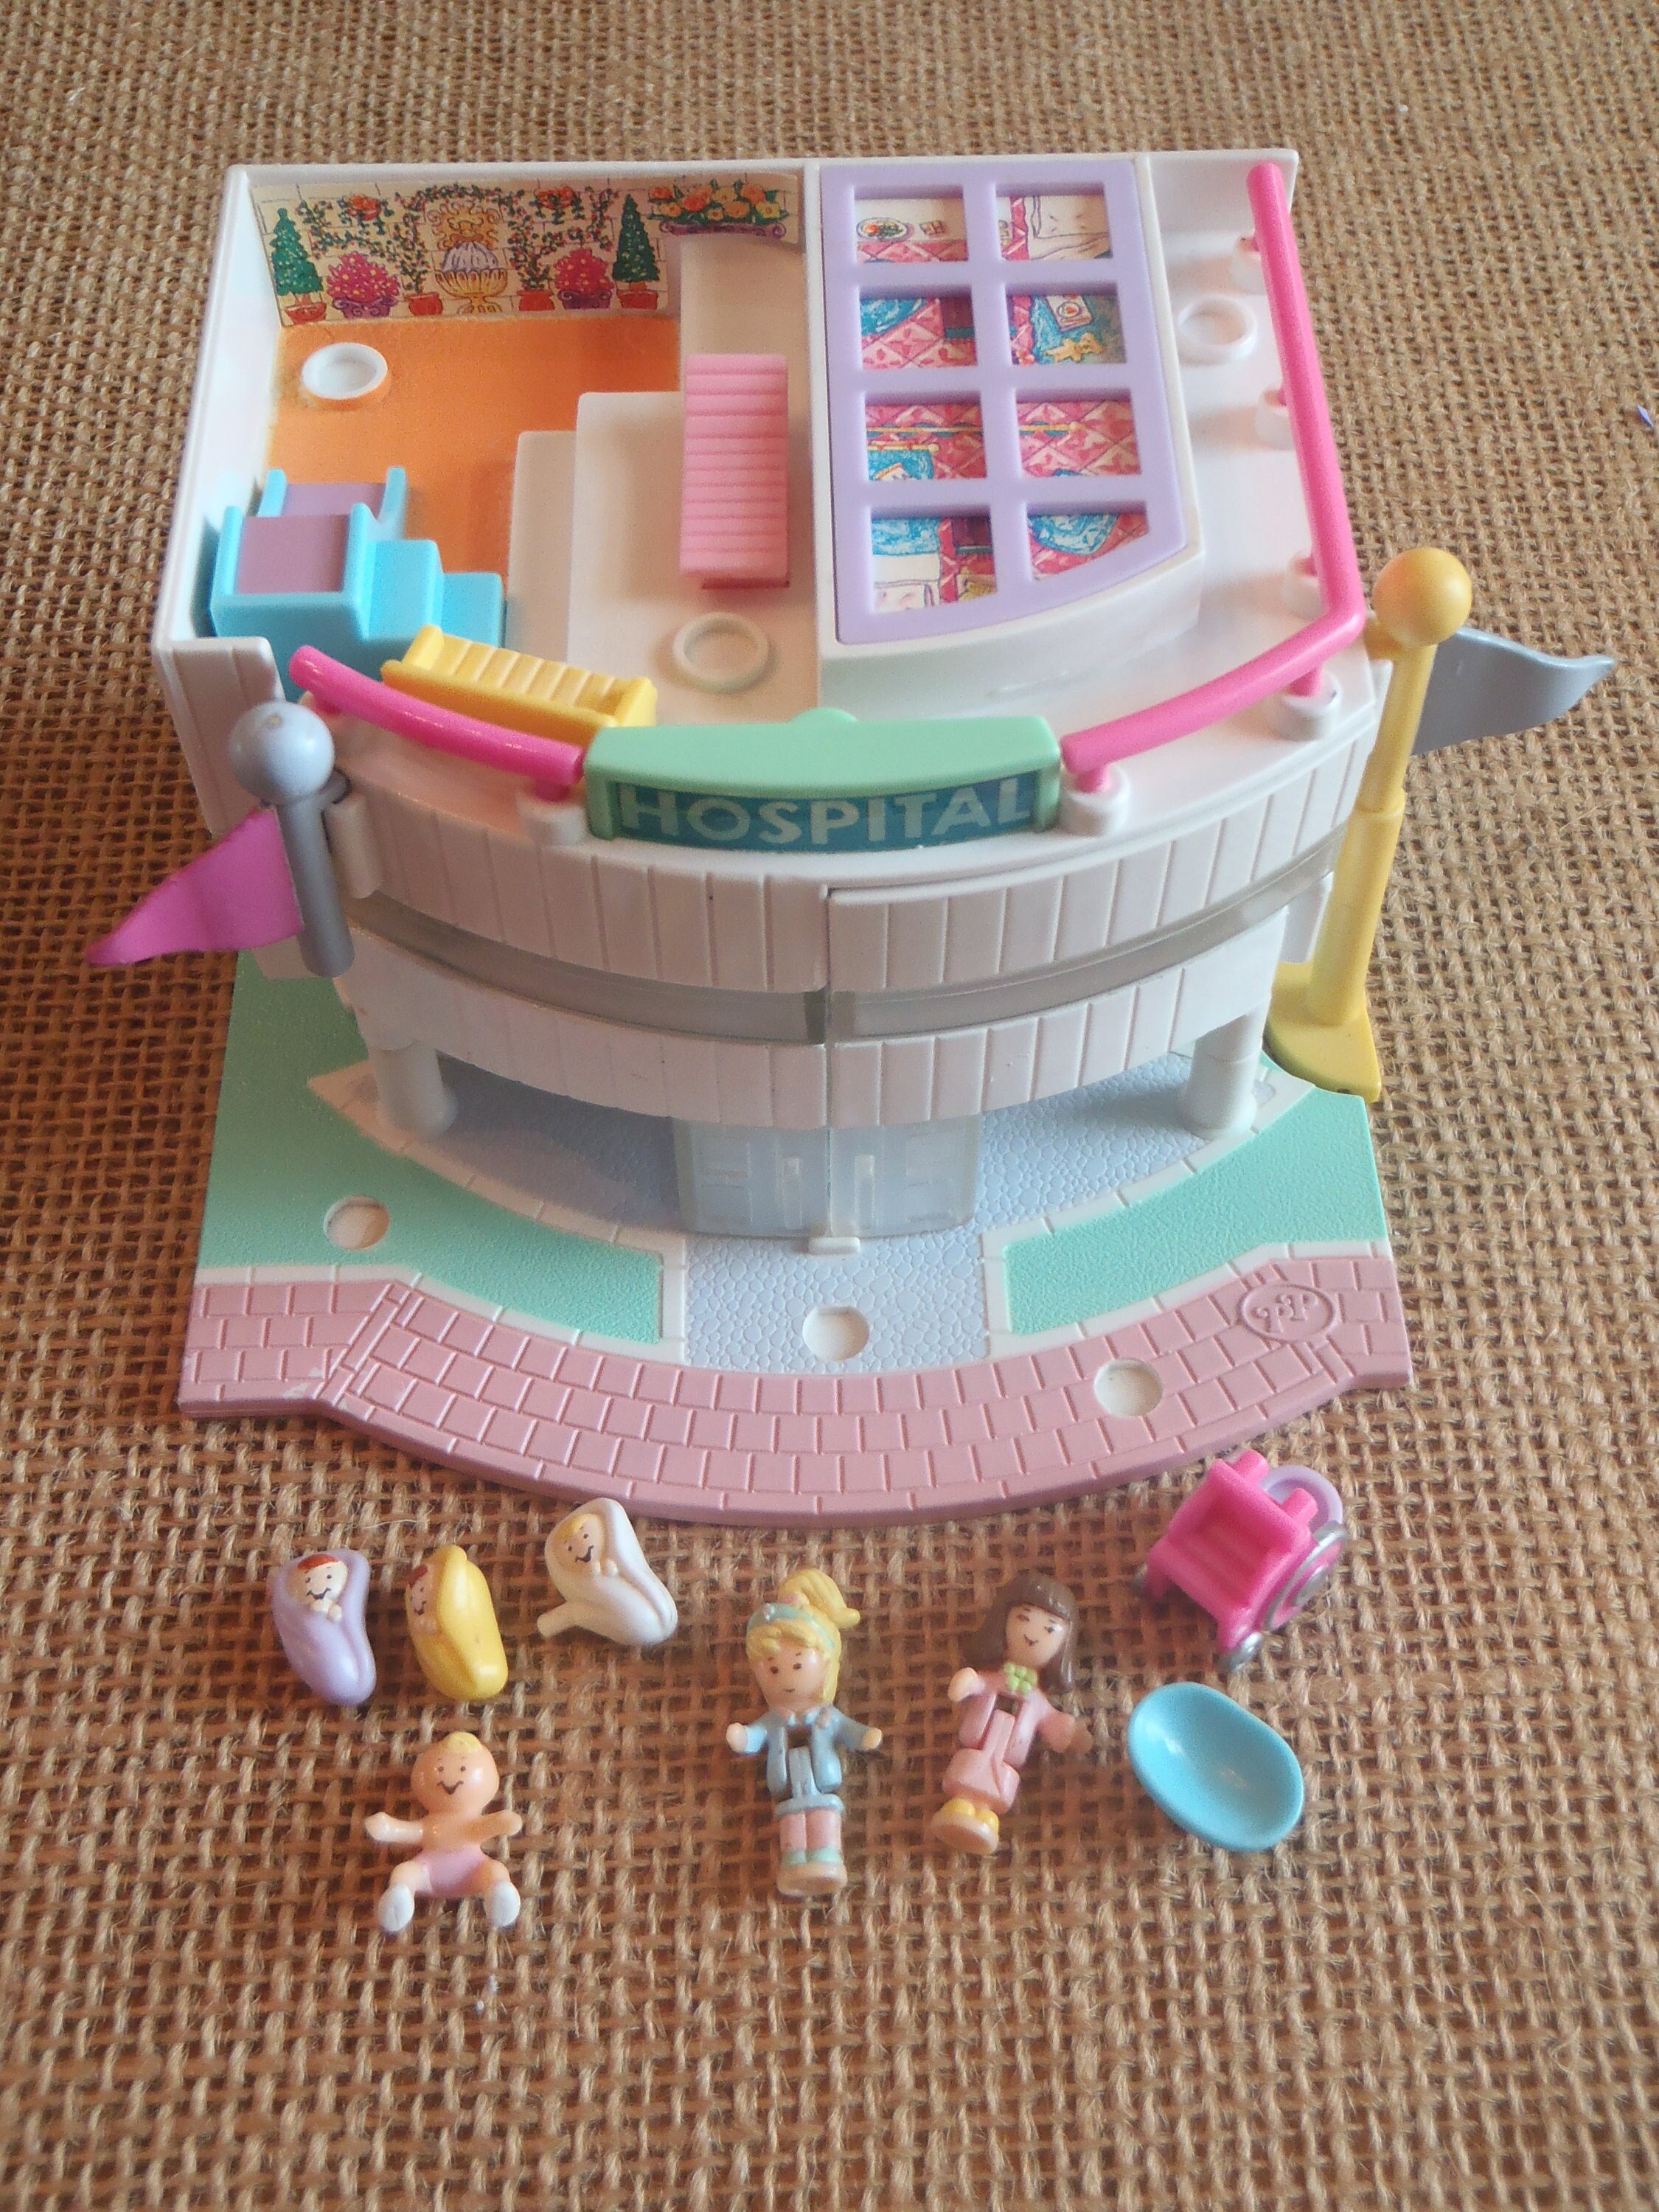 Polly Pocket : Holiday & Christmas Gift Ideas for Kids - Target